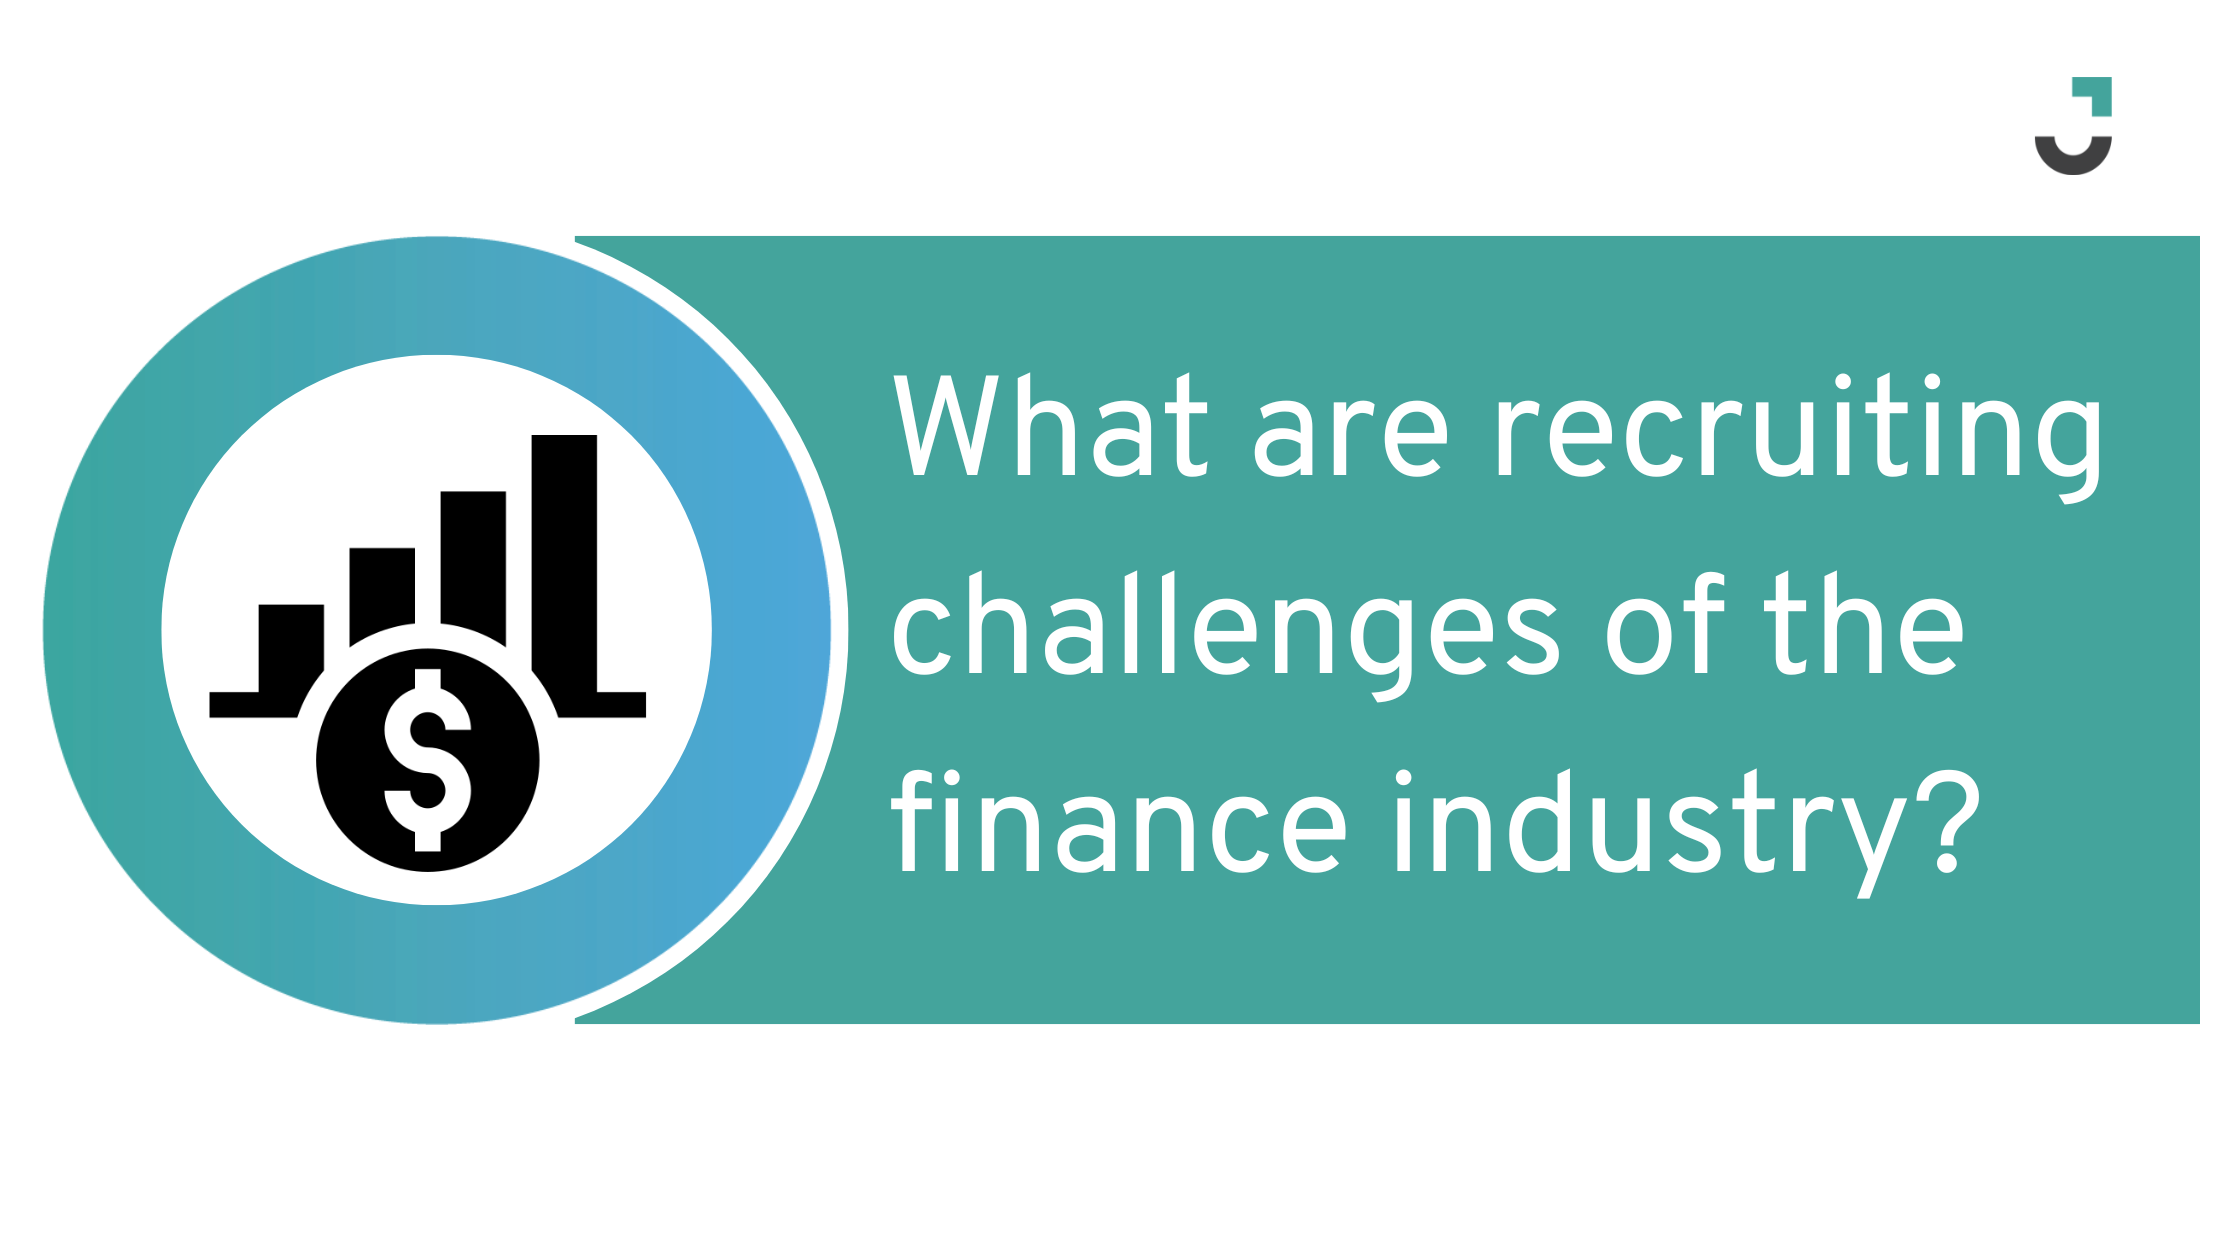 What are recruiting challenges of the finance industry?